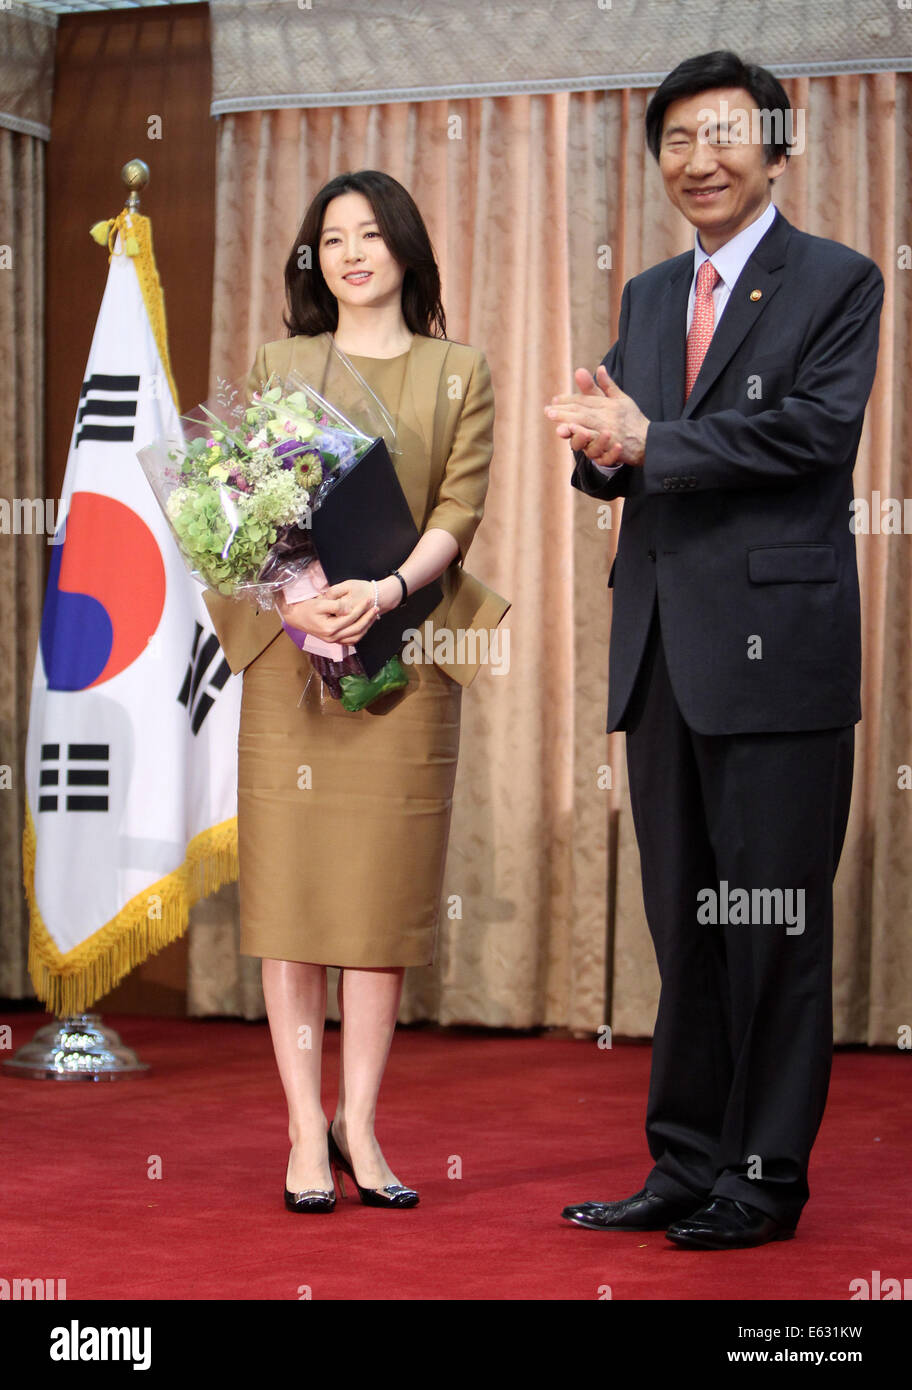 Seoul, ASEAN-South Korea Commemorative Summit 2014. 13th Aug, 2014. South Korean actress Lee Young-ae (L), goodwill ambassador for the ASEAN-South Korea Commemorative Summit 2014, attends a ceremony with South Korean Foreign Minister Yun Byung-se in Seoul Aug. 13, 2014. © Park Jin-hee/Xinhua/Alamy Live News Stock Photo